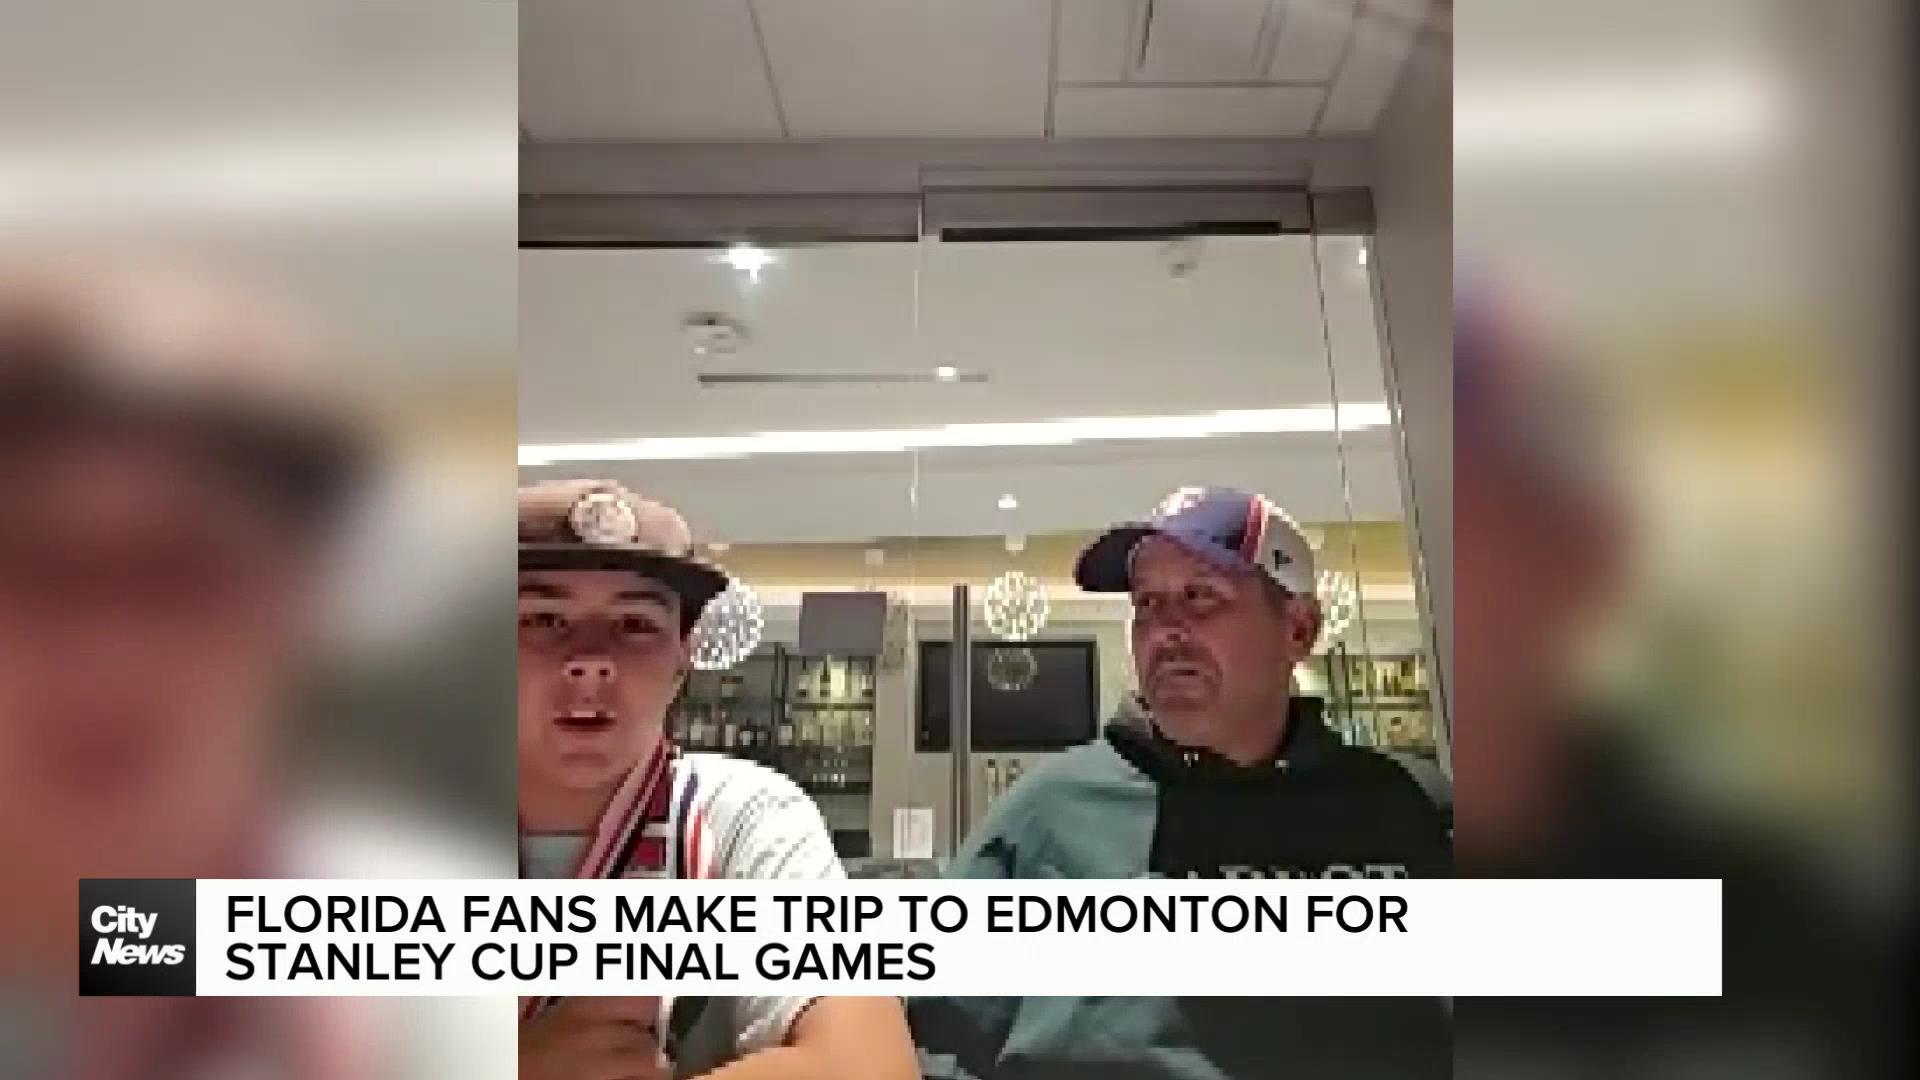 Florida fans make trip to Edmonton for Stanley Cup Final games